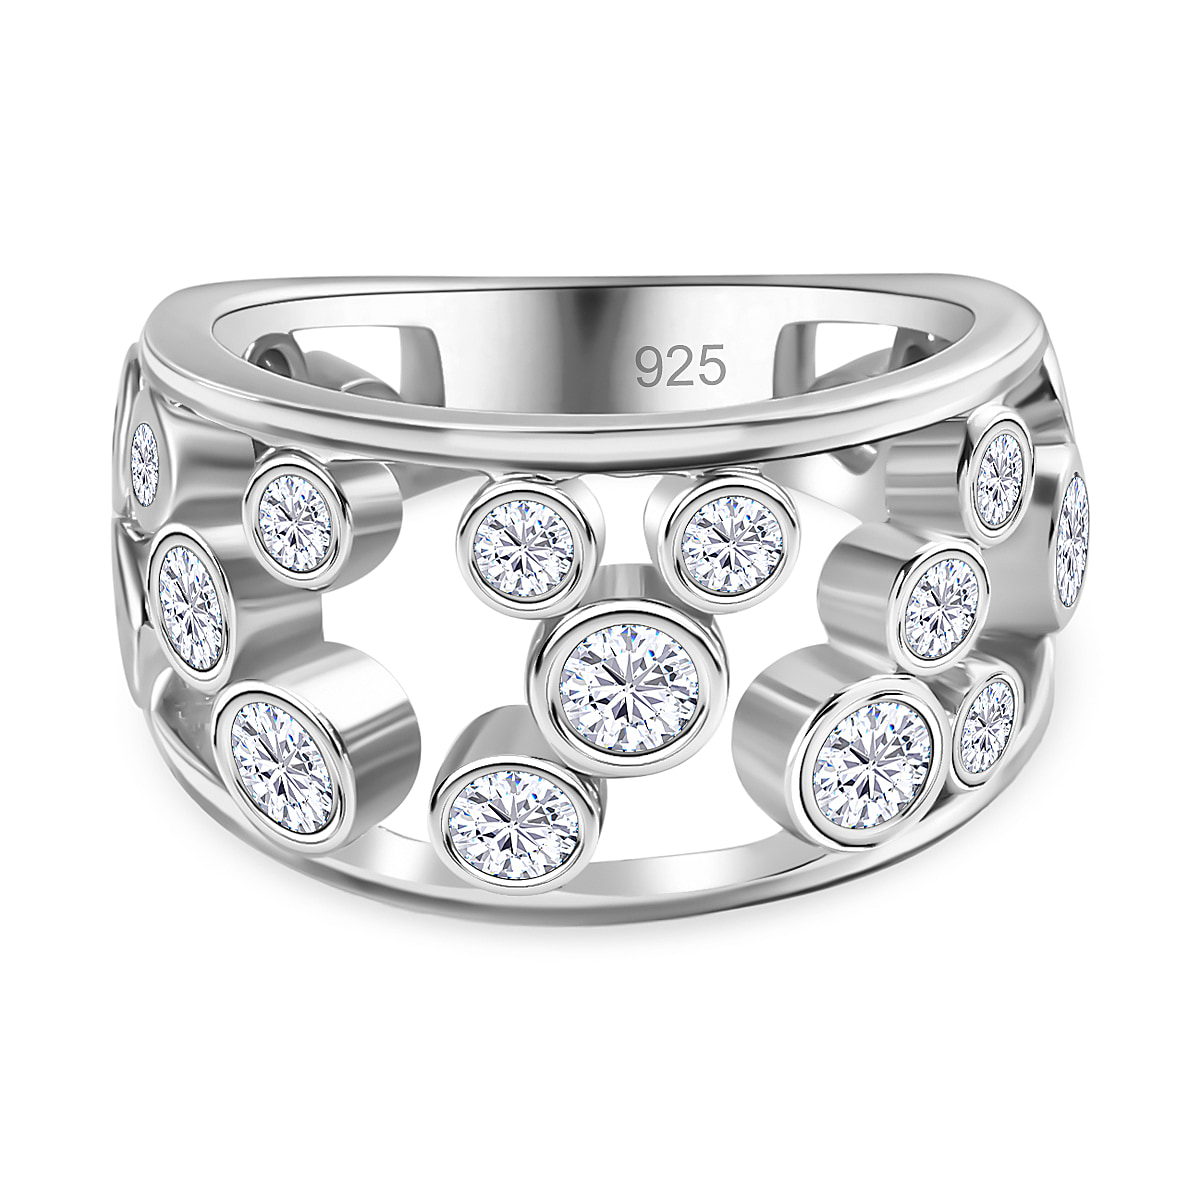 The Exclusive Moissanite Bubble Ring in Platinum Overlay Sterling Silver